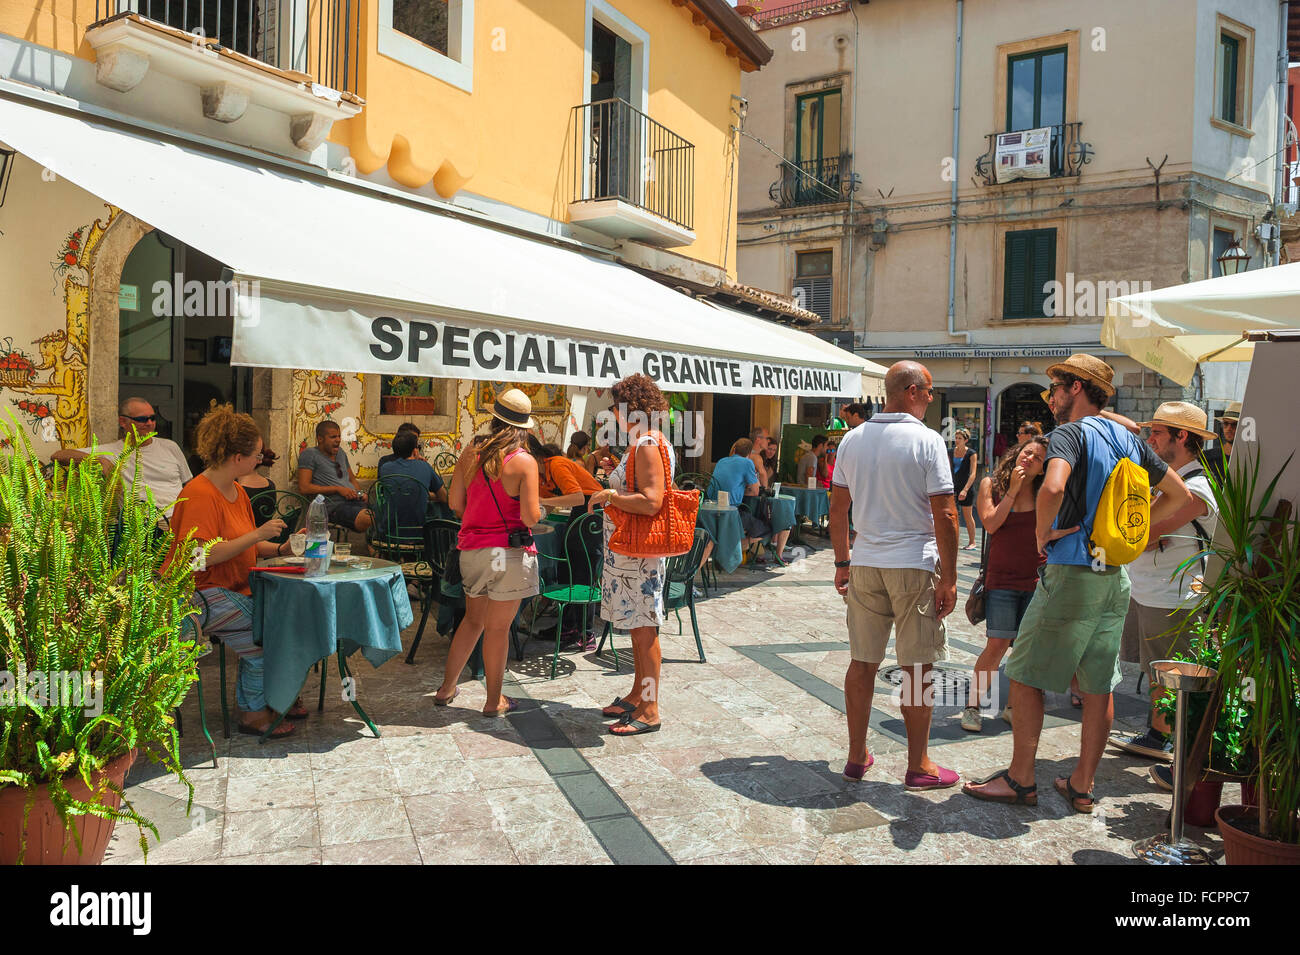 Italy bar summer, view of people standing and sitting outside a popular  granita bar in Taormina, Sicily Stock Photo - Alamy